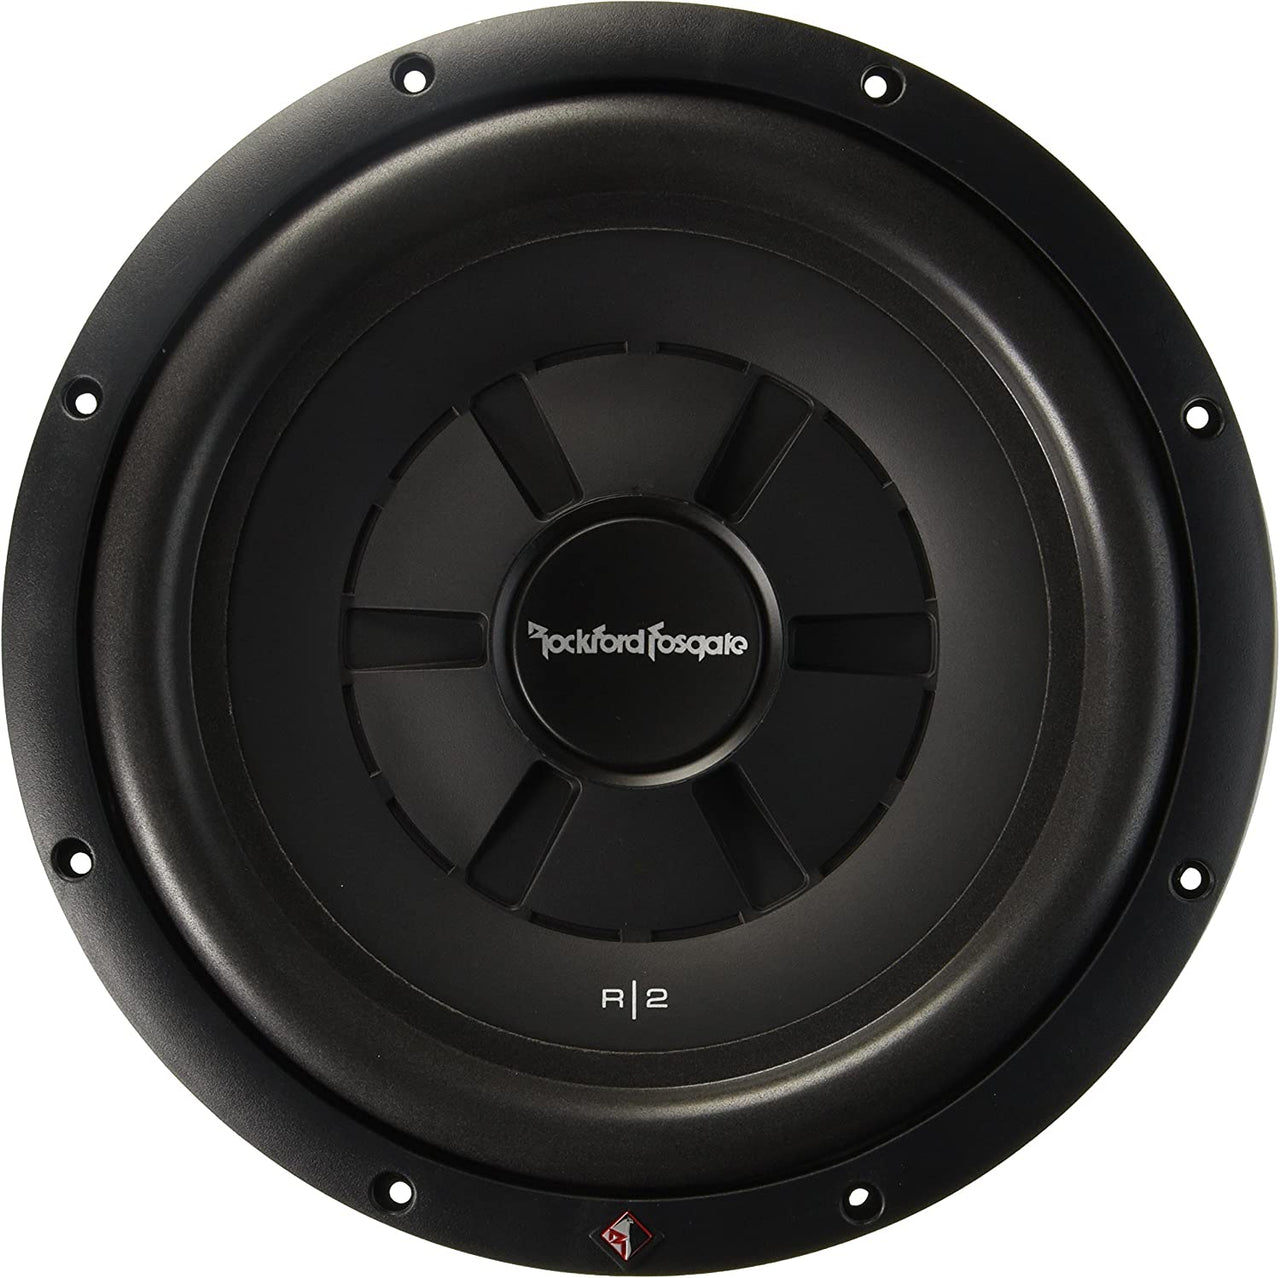 1 Pair Rockford Fosgate Prime R2SD4-12 prime stage  500W Max 12" shallow mount dual 4-ohm voice coils subwoofer